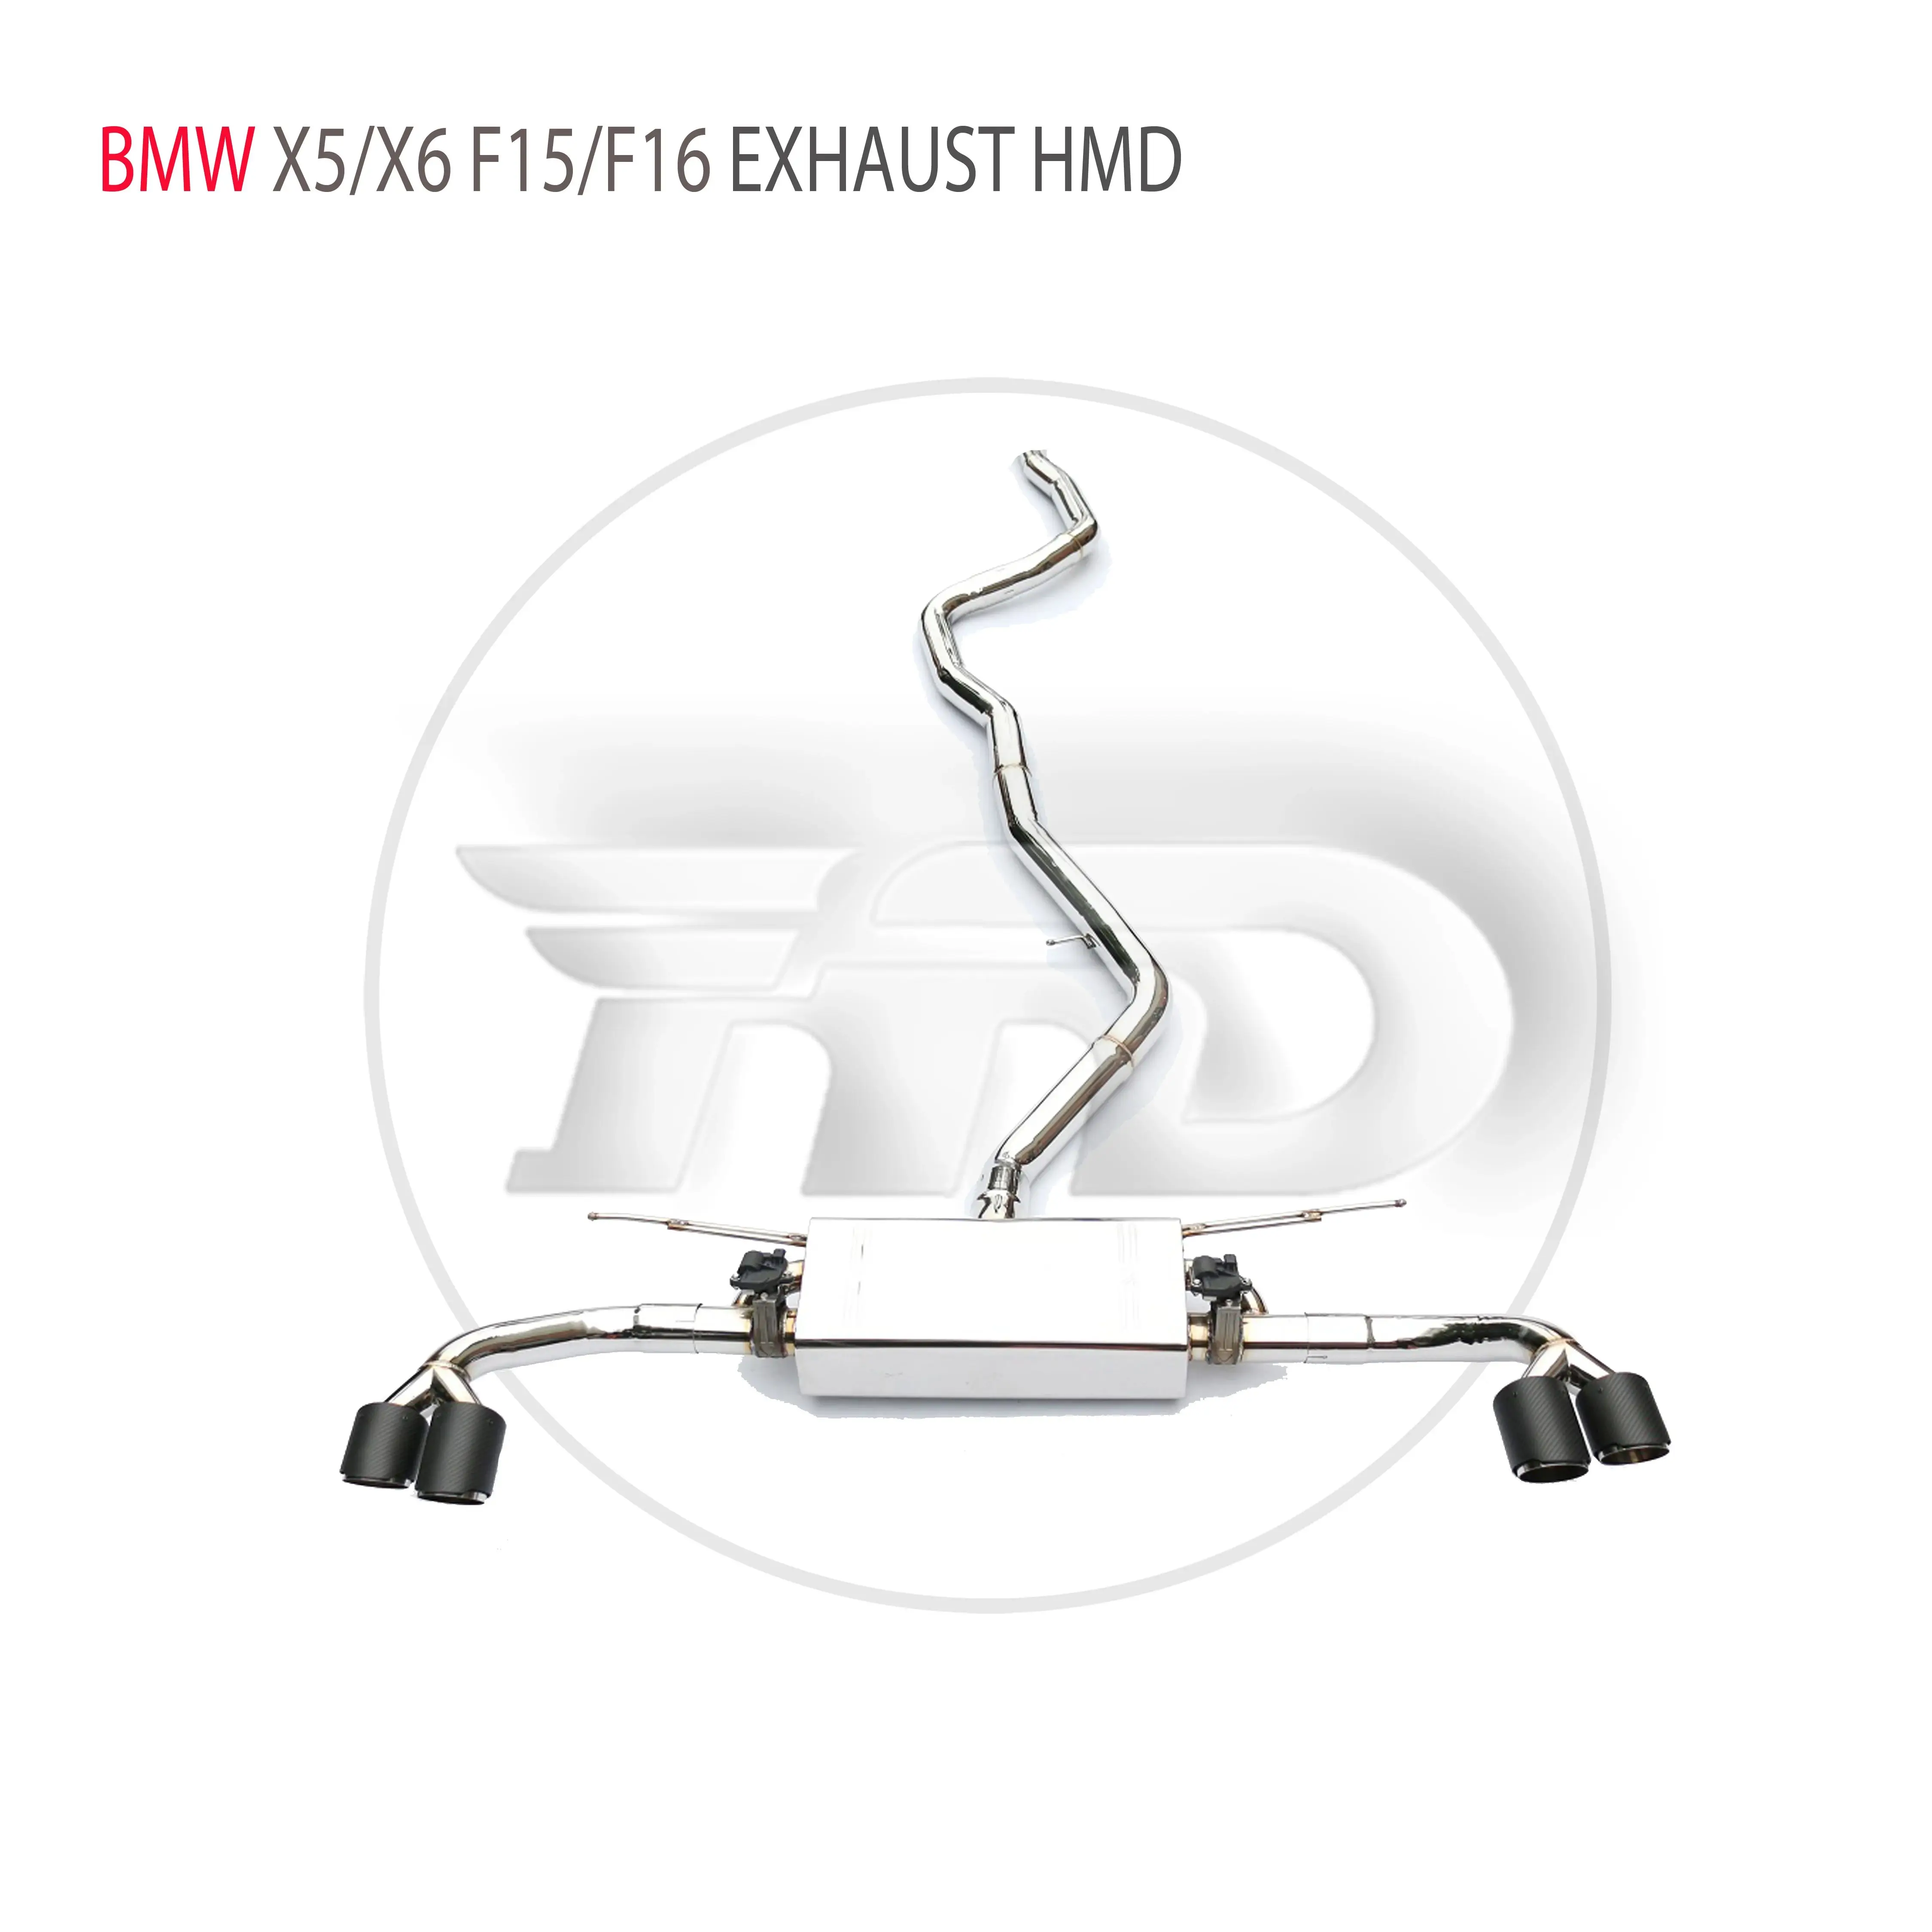 

HMD Stainless Steel Exhaust System Catback Is Suitable For BMW X5 X6 F15 F16 2.0T 2014-2019 Auto Modification Electronic Valve